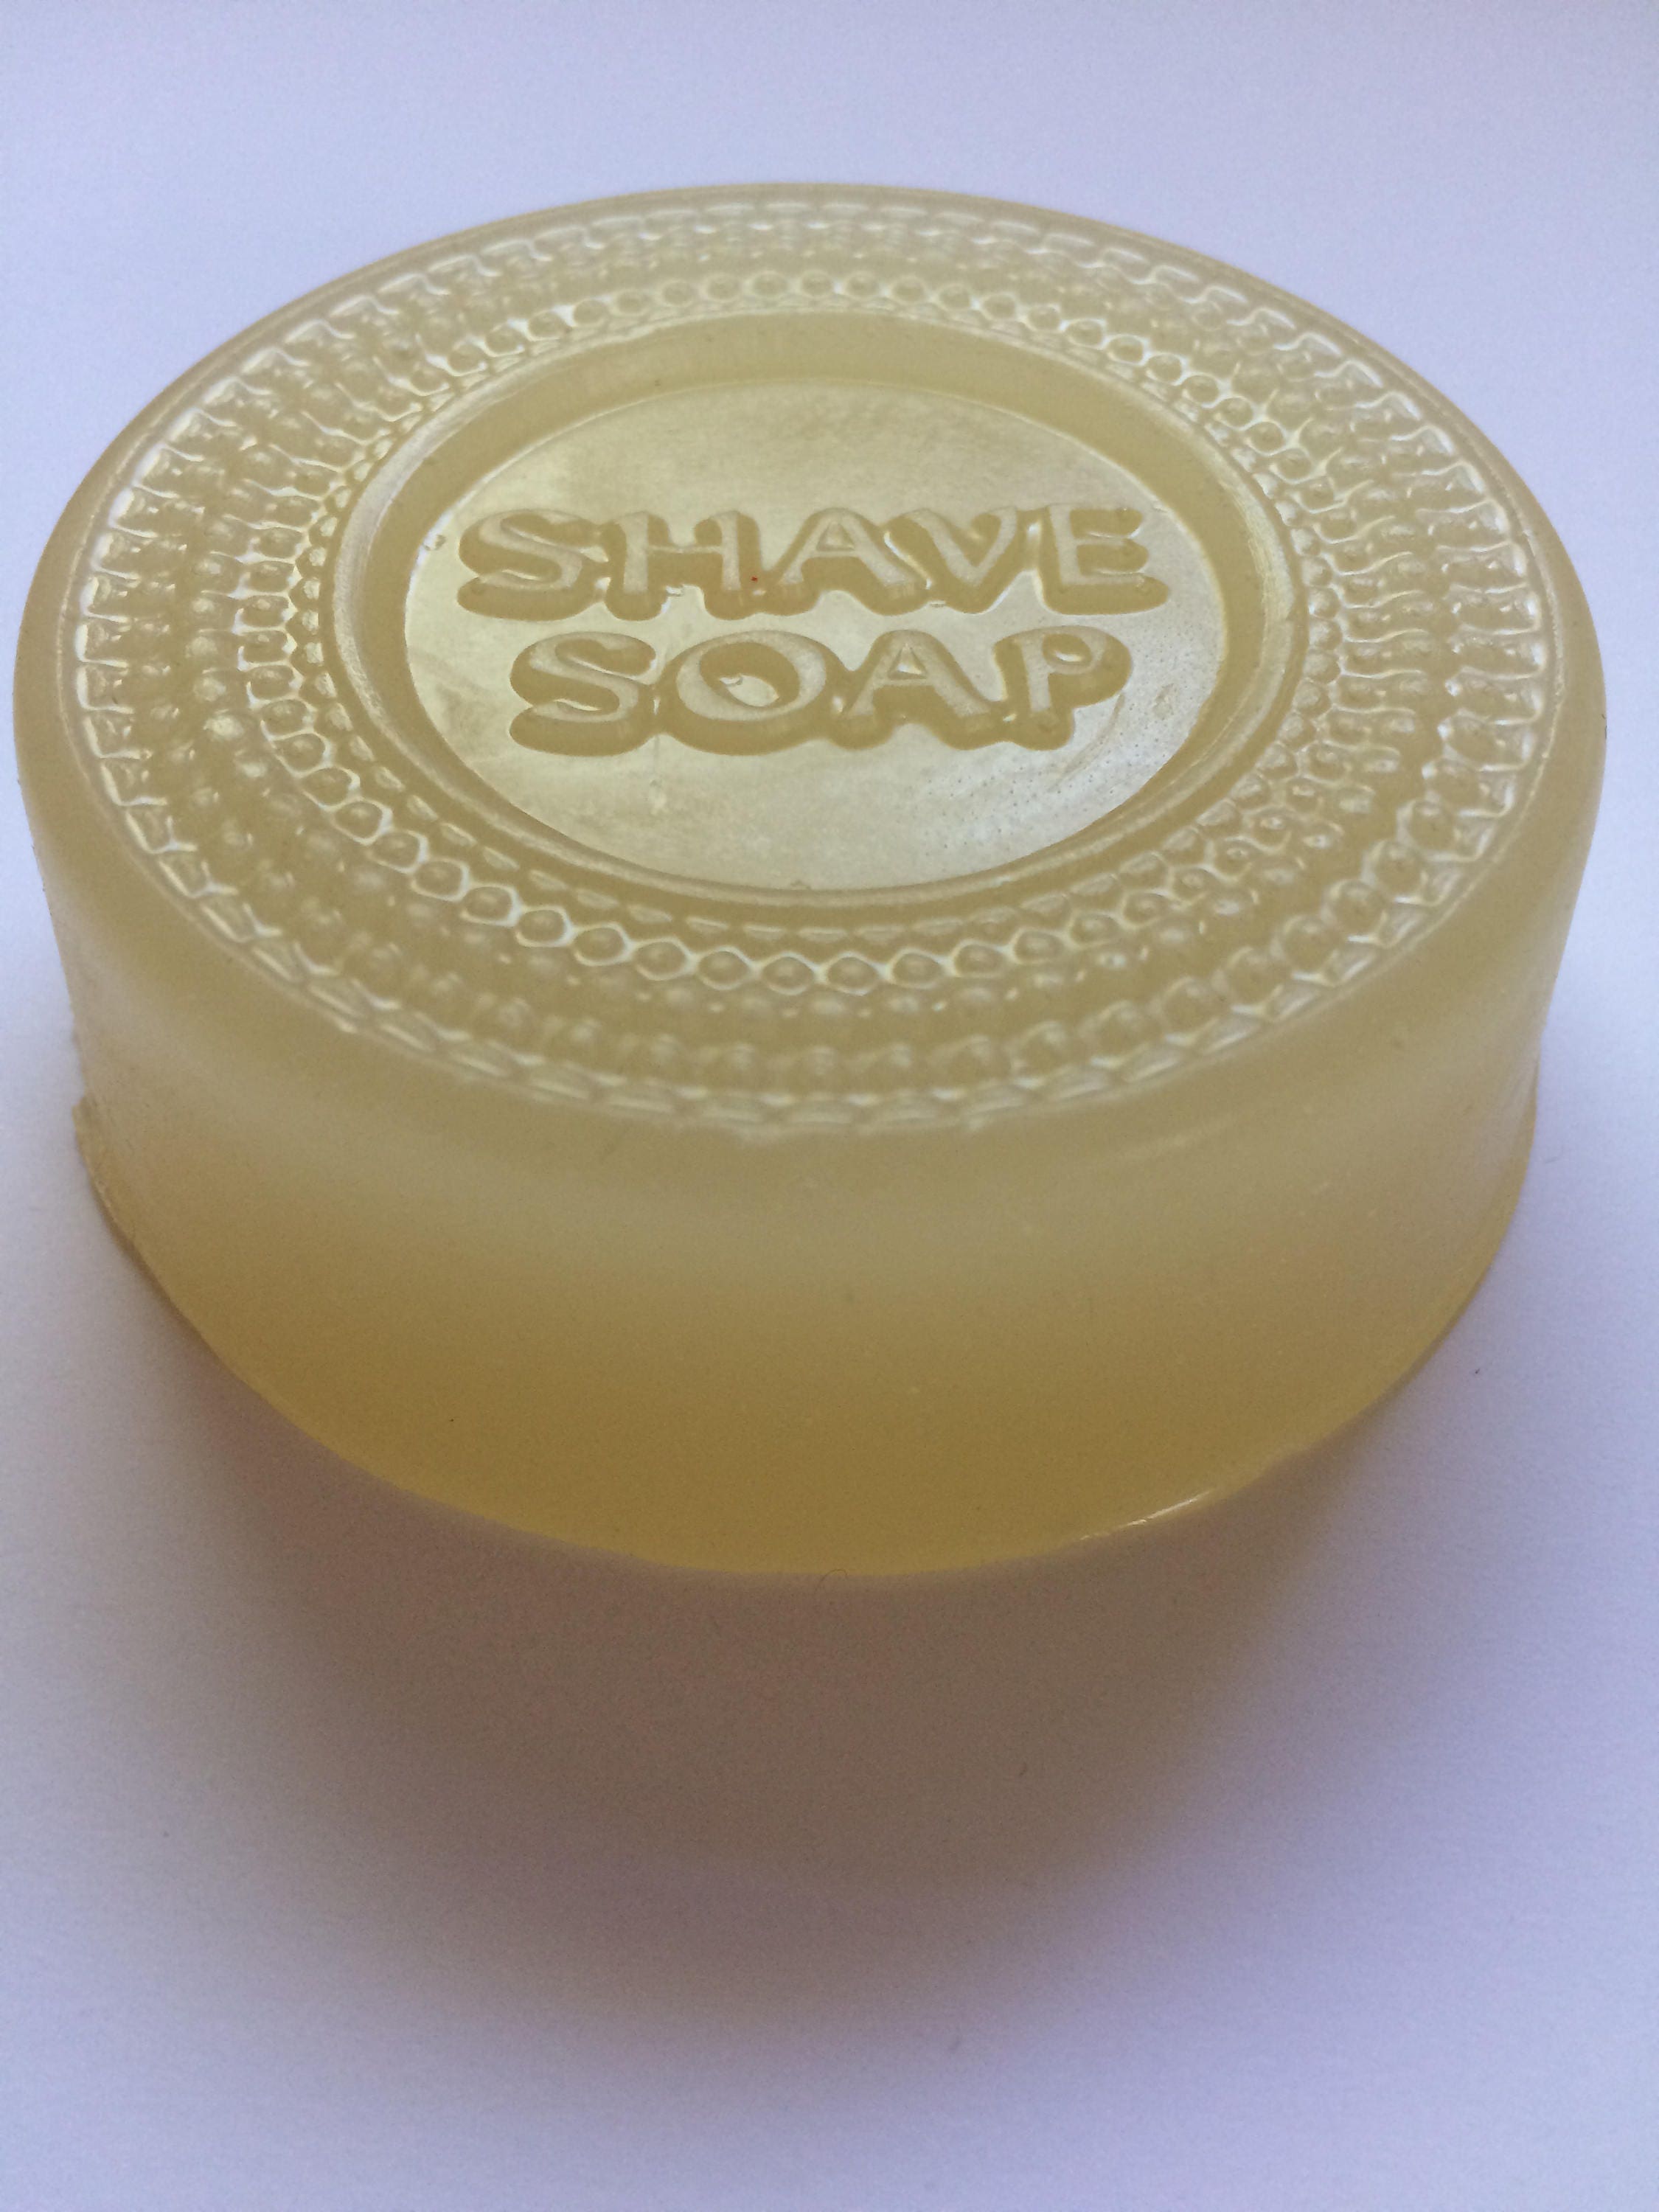 Hair Removal Soap - Etsy